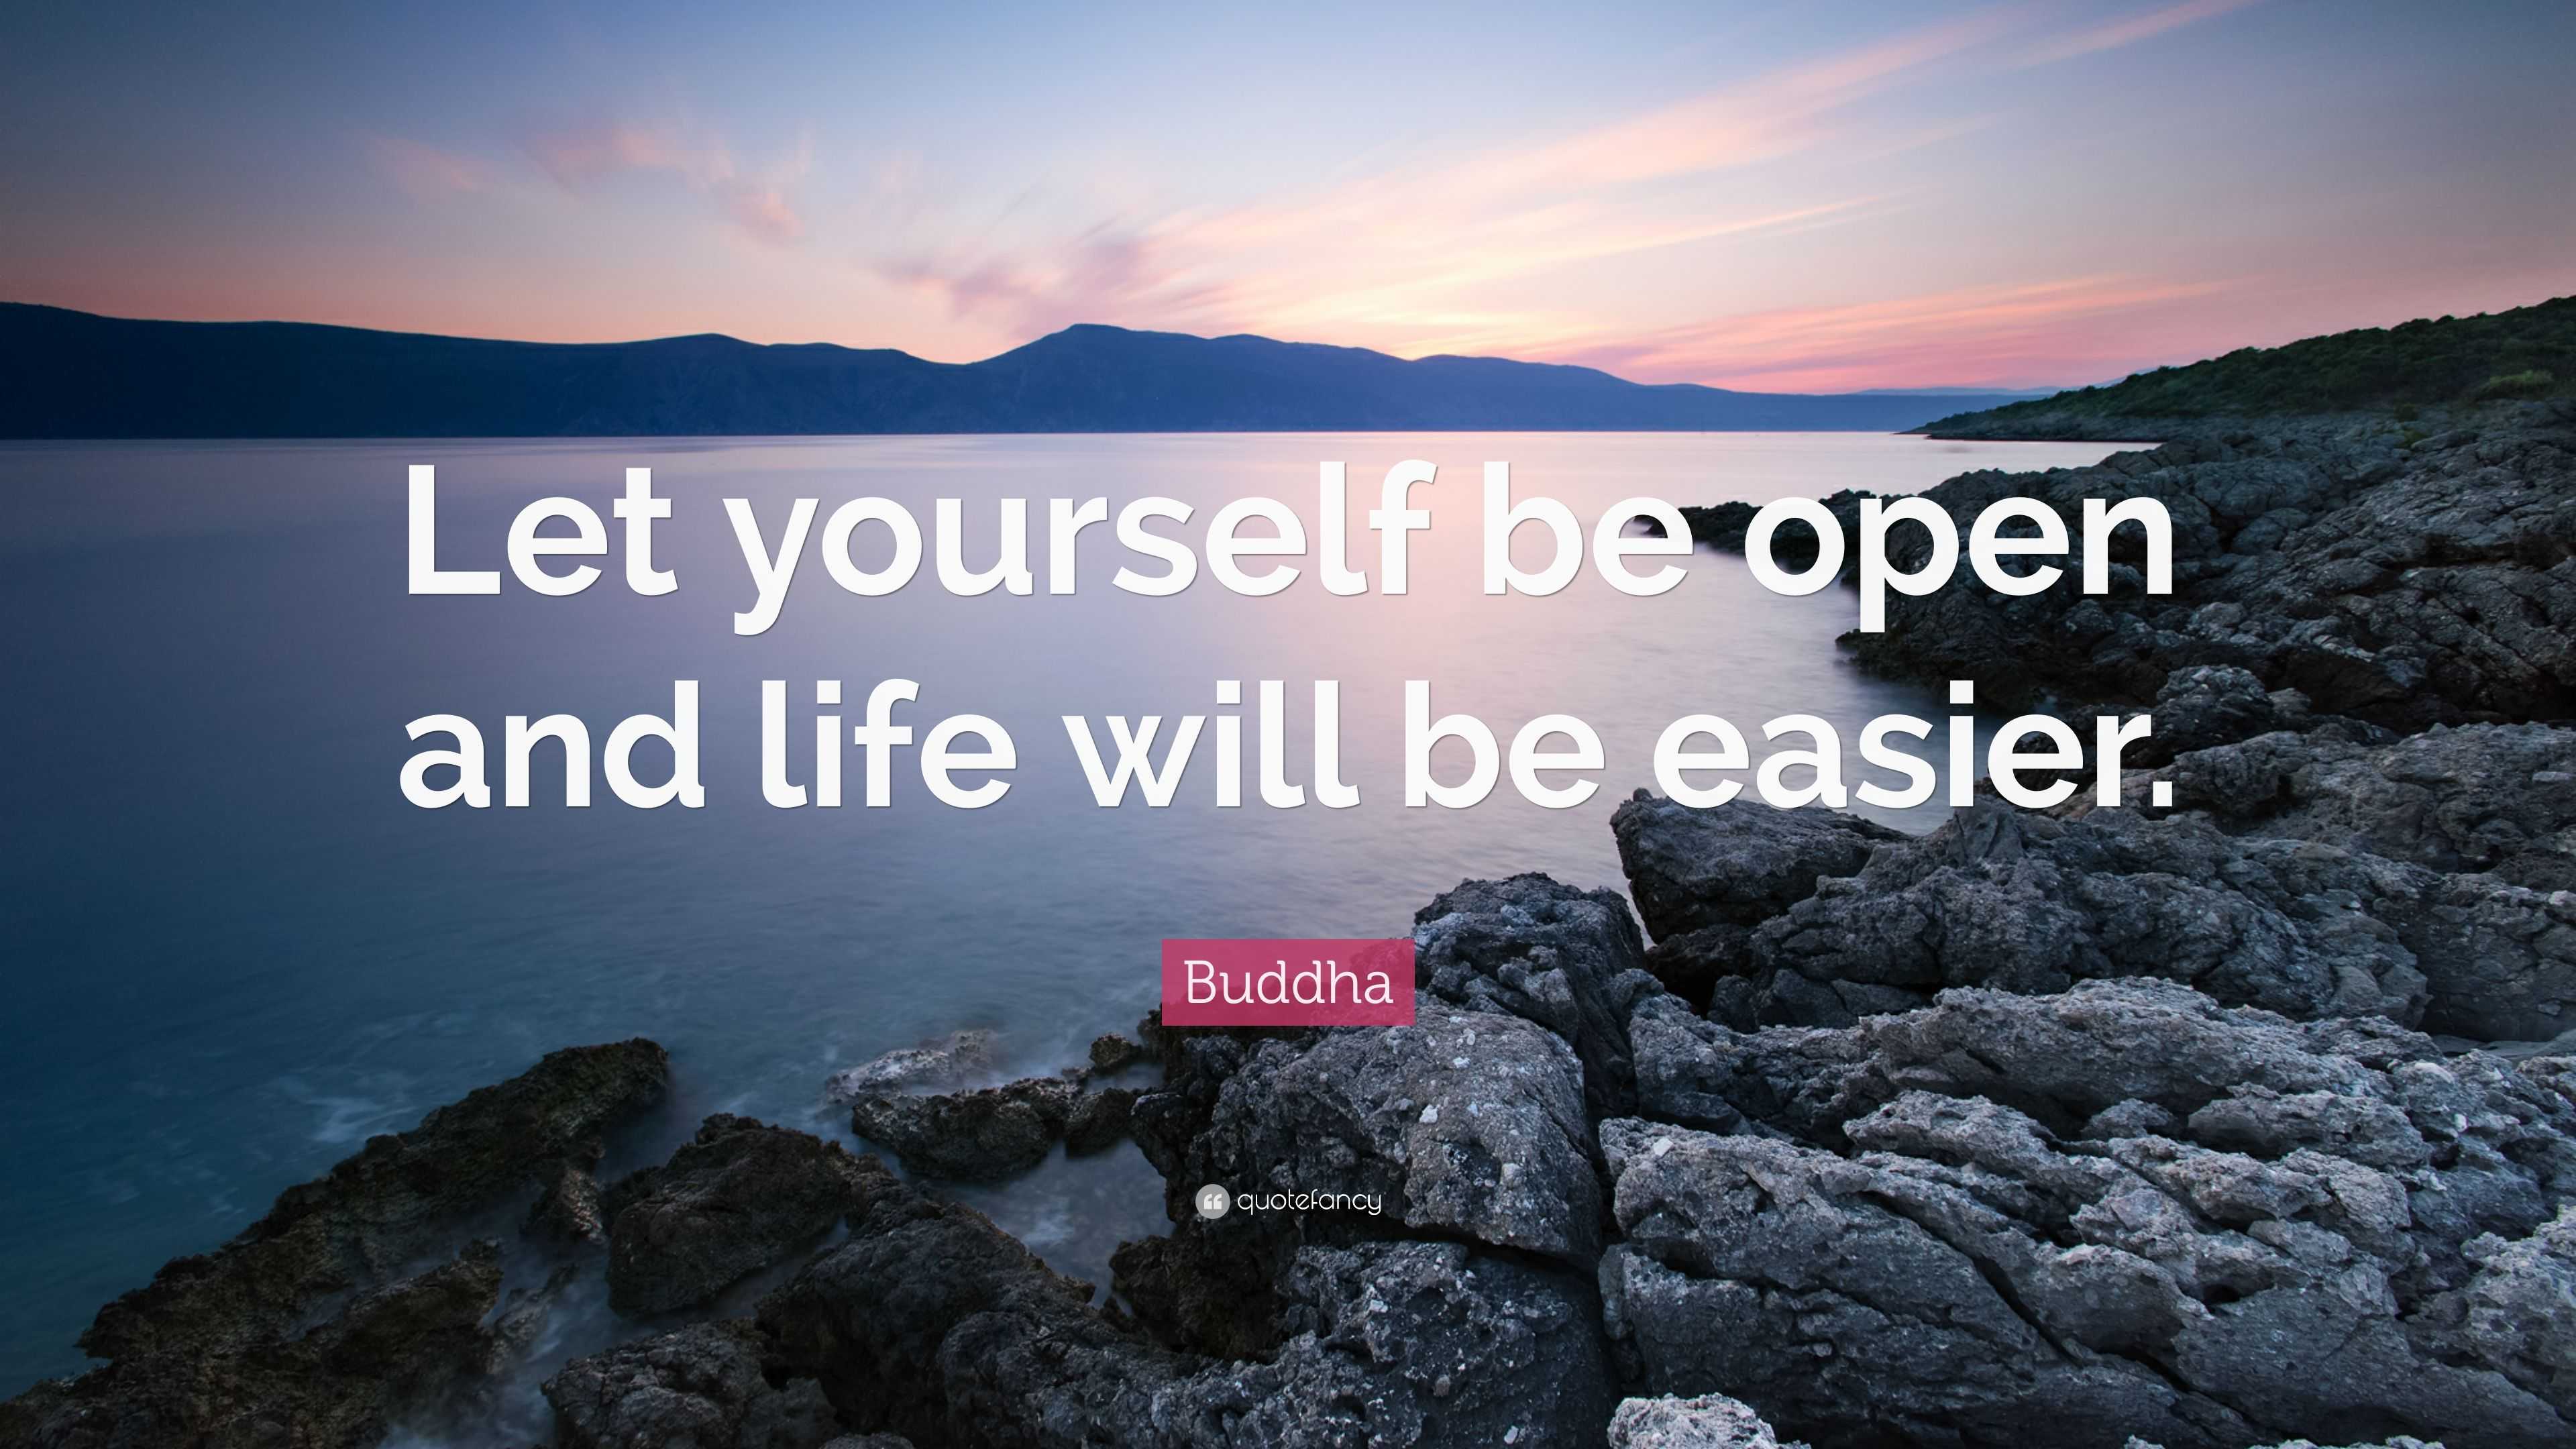 buddha quote about life buddha quote u201clet yourself be open and life will be easier u201d 12